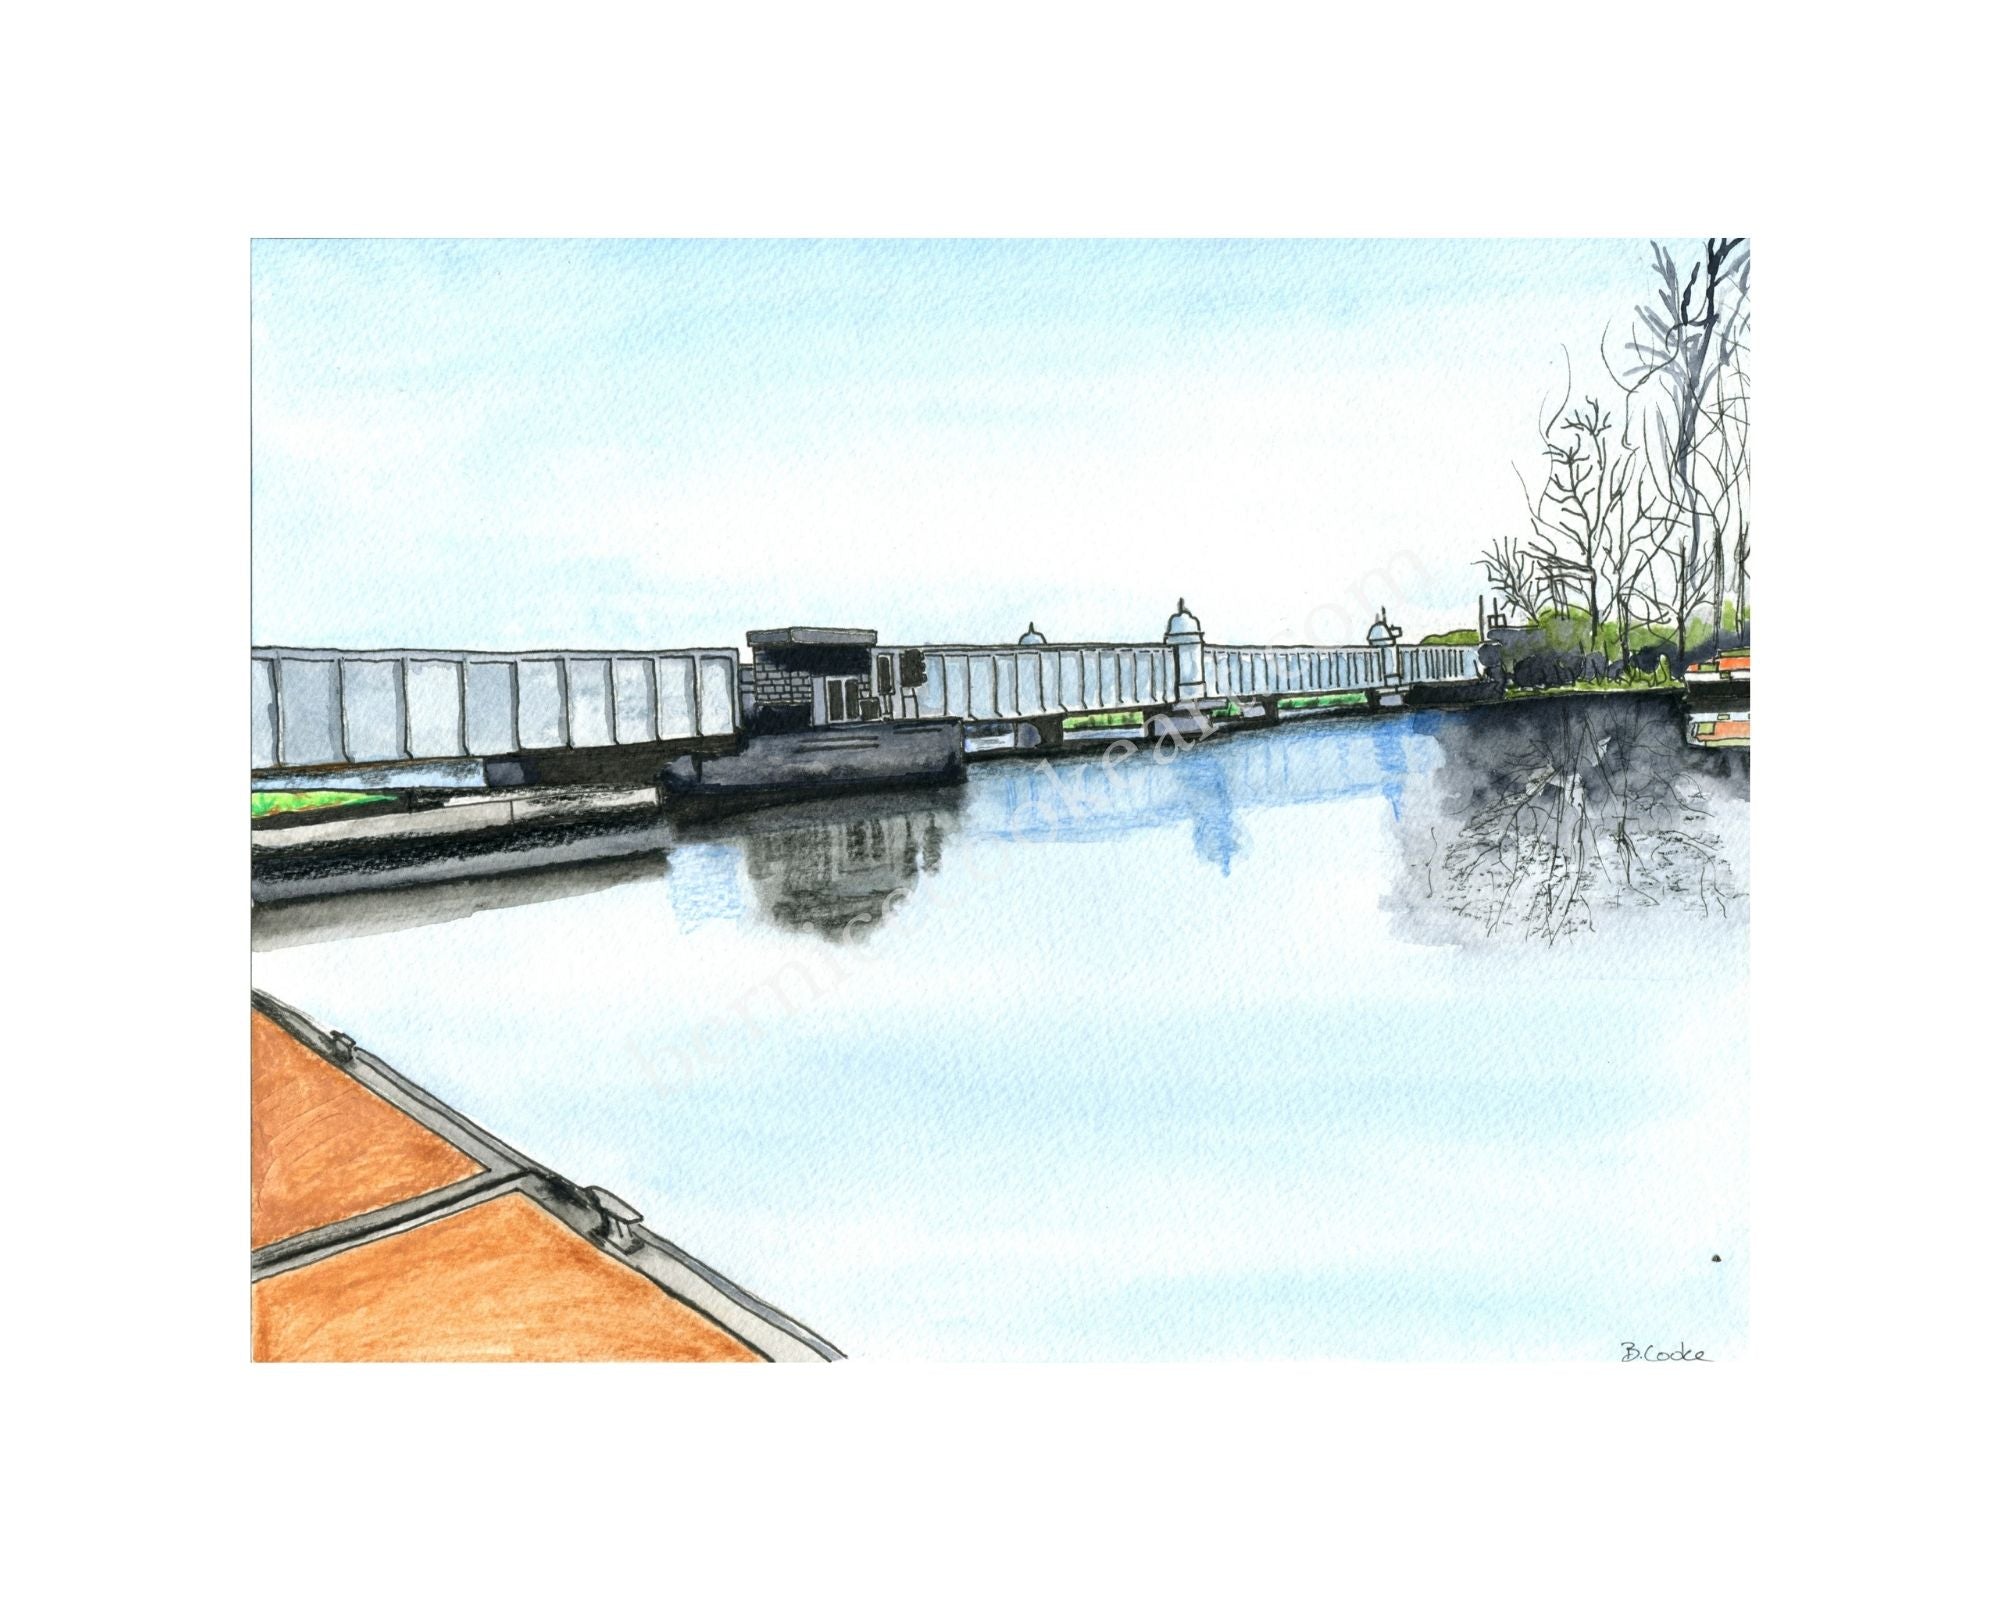 Portumna Bridge, Co. Galway - Pen & Watercolor Sketch - Giclée Print by Bernice Cooke - mounted to 10" x 8".